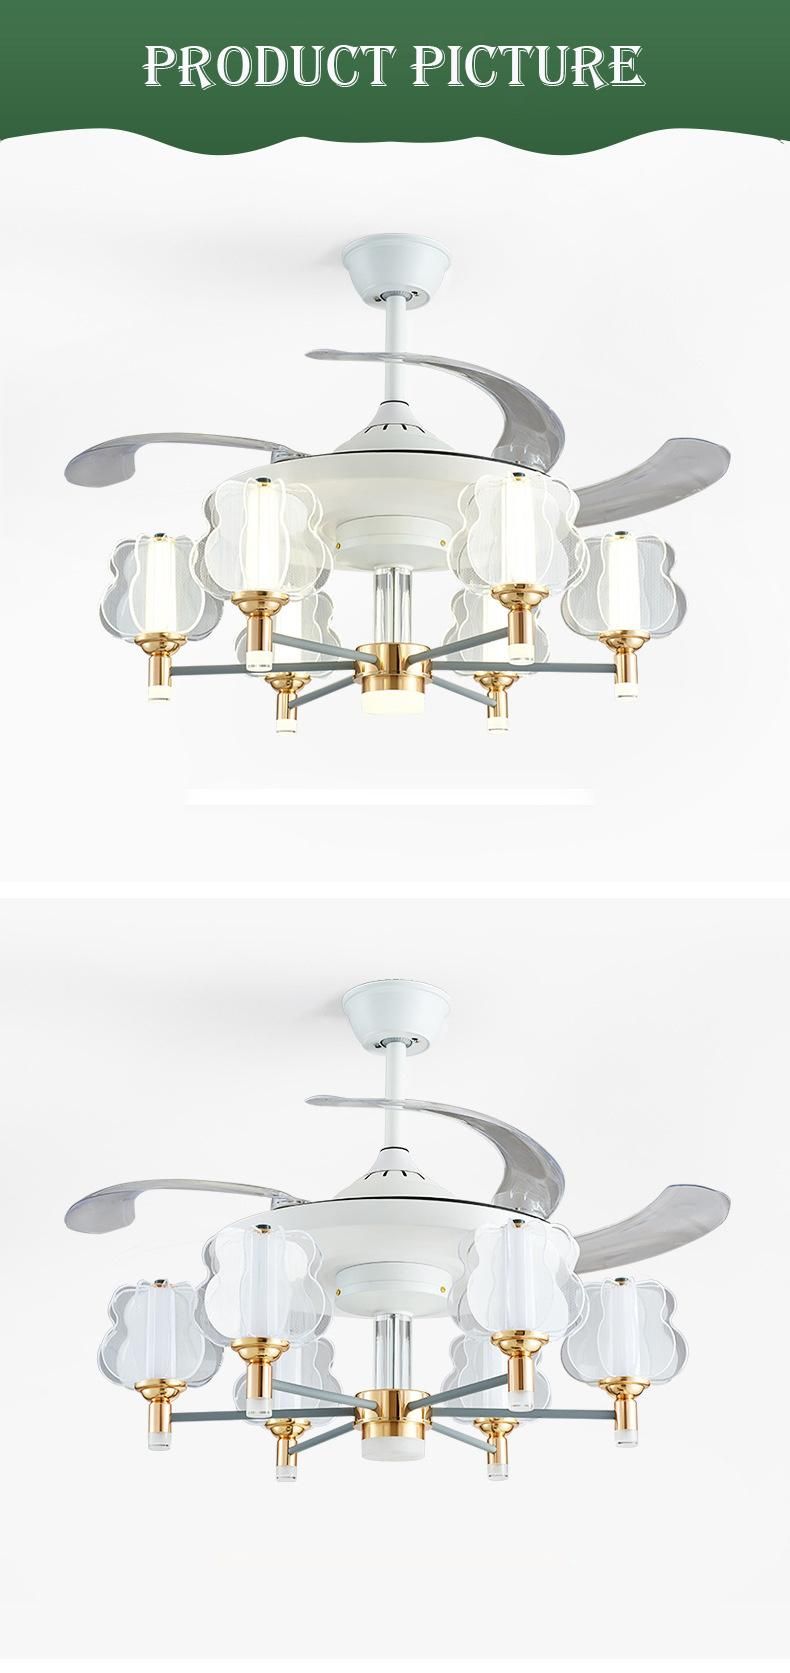 Ceiling Fan with Light and Remote Control White LED Lighting Decorative for Home Living Room Bedroom